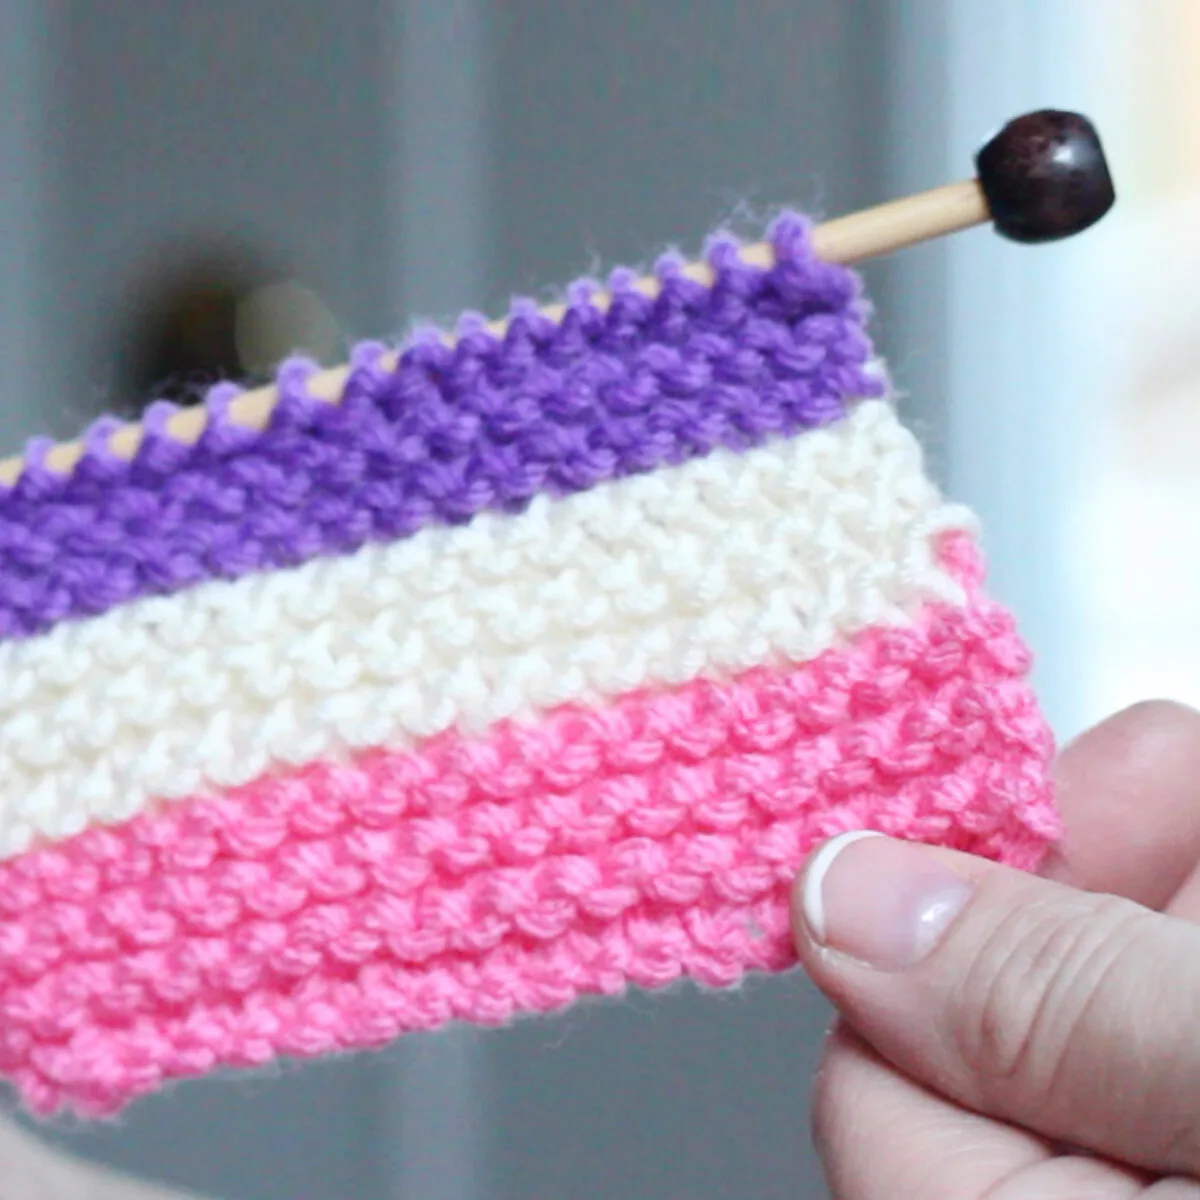 Knitted Swatch of horizontal stripes in purple, white, and pink color yarn on knitting needle with hands holding.